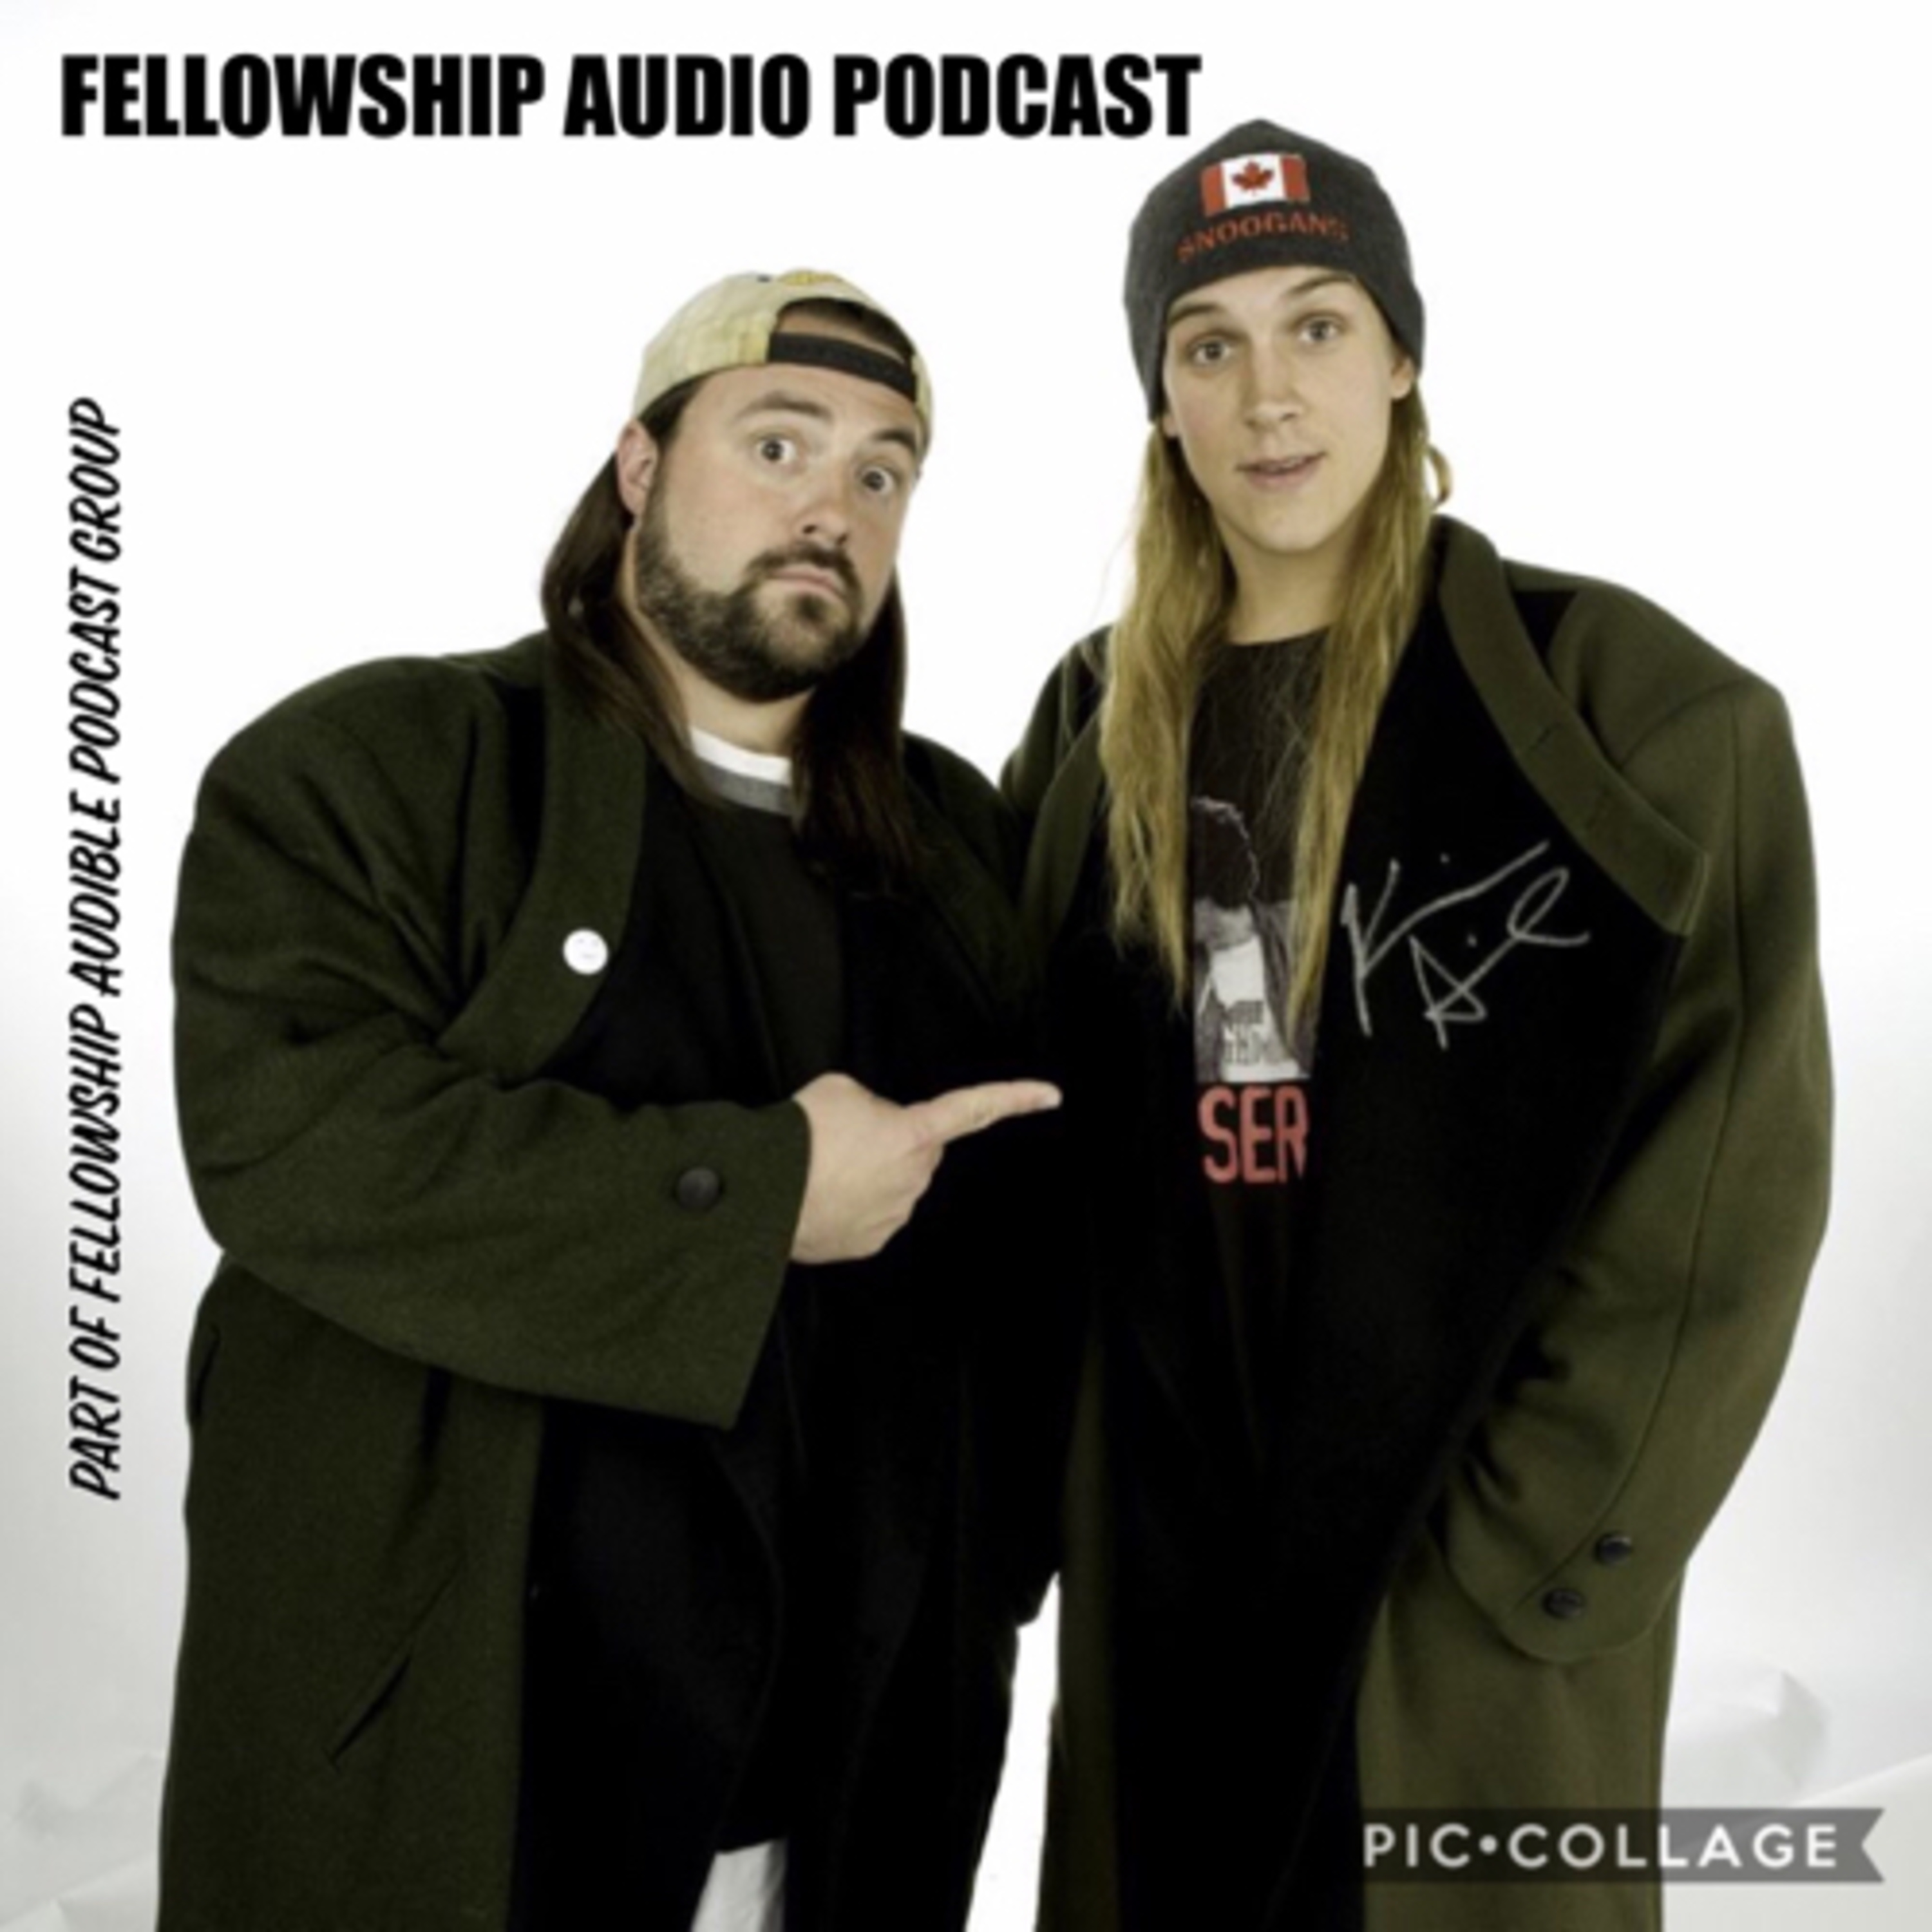 Fellowship Audio Podcast 12SEP19 | Keeping up with Jay and Silent Bob